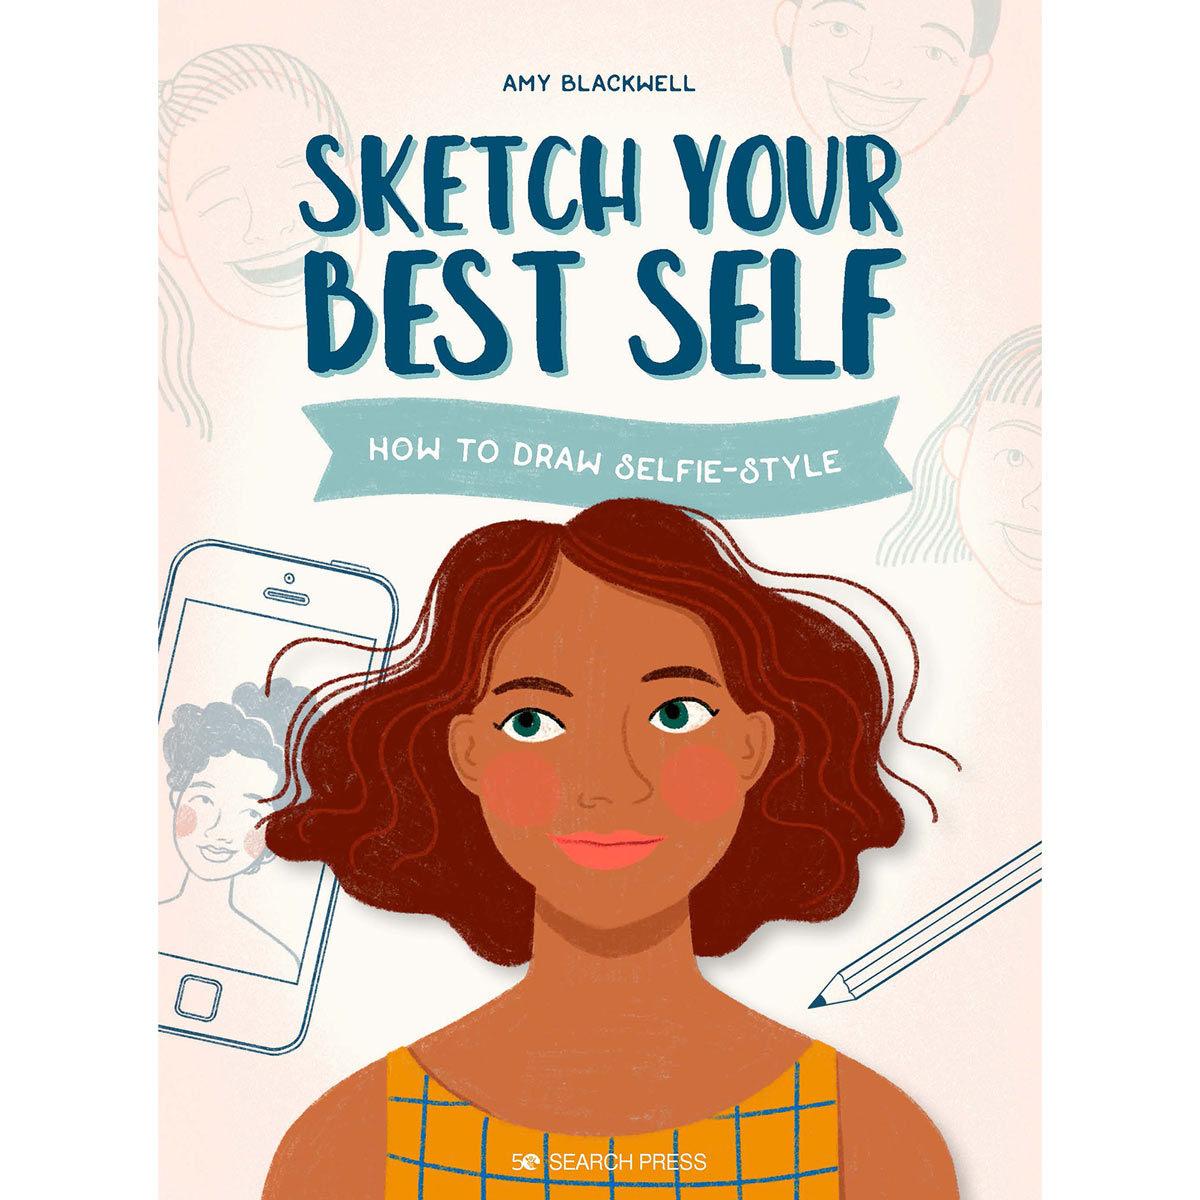 Search Press Books - Sketch Your Best Self- How to draw Selfie style